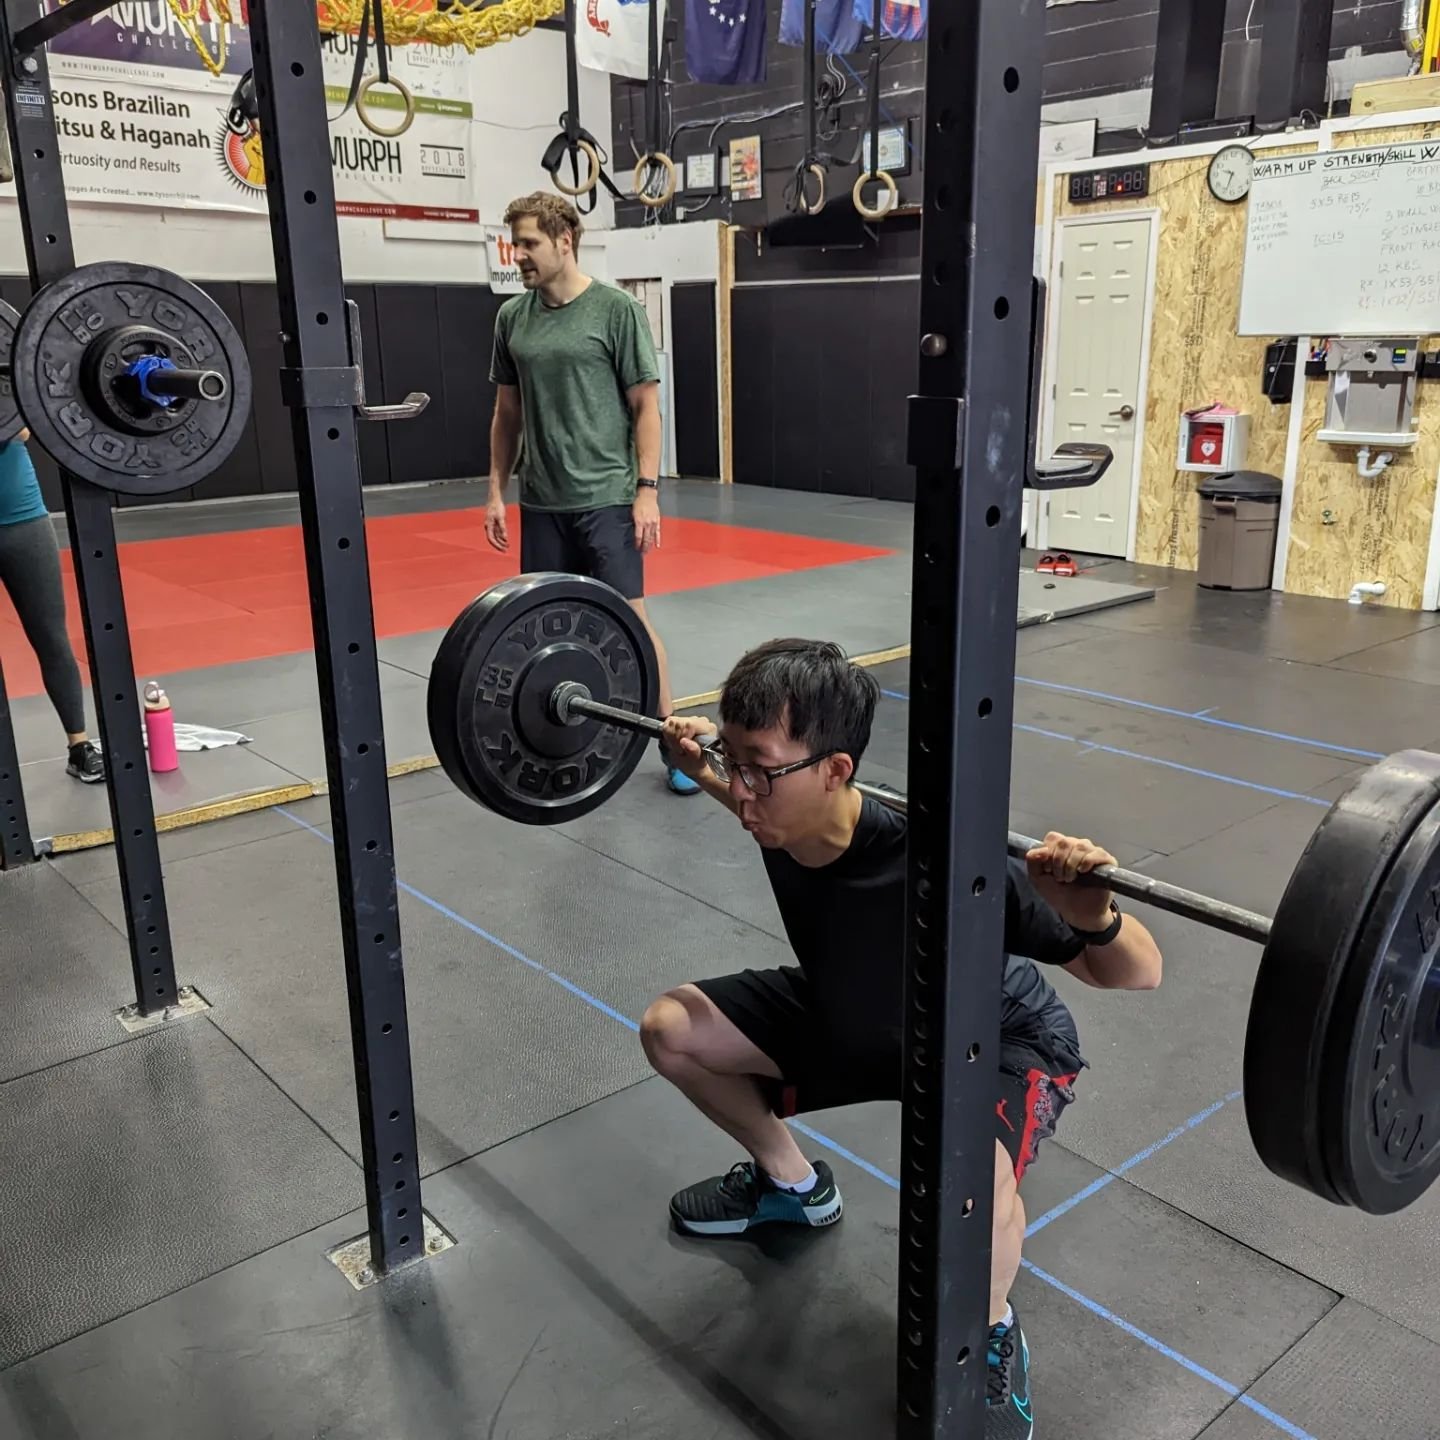 Welcome to new member Ryan! Ryan @okmhygv has joined us for a few months now and always comes willing to learn. We appreciate his dedication and even showing up while working through an injury 💙💚.
.
#backsquats #fitness #tysonsva